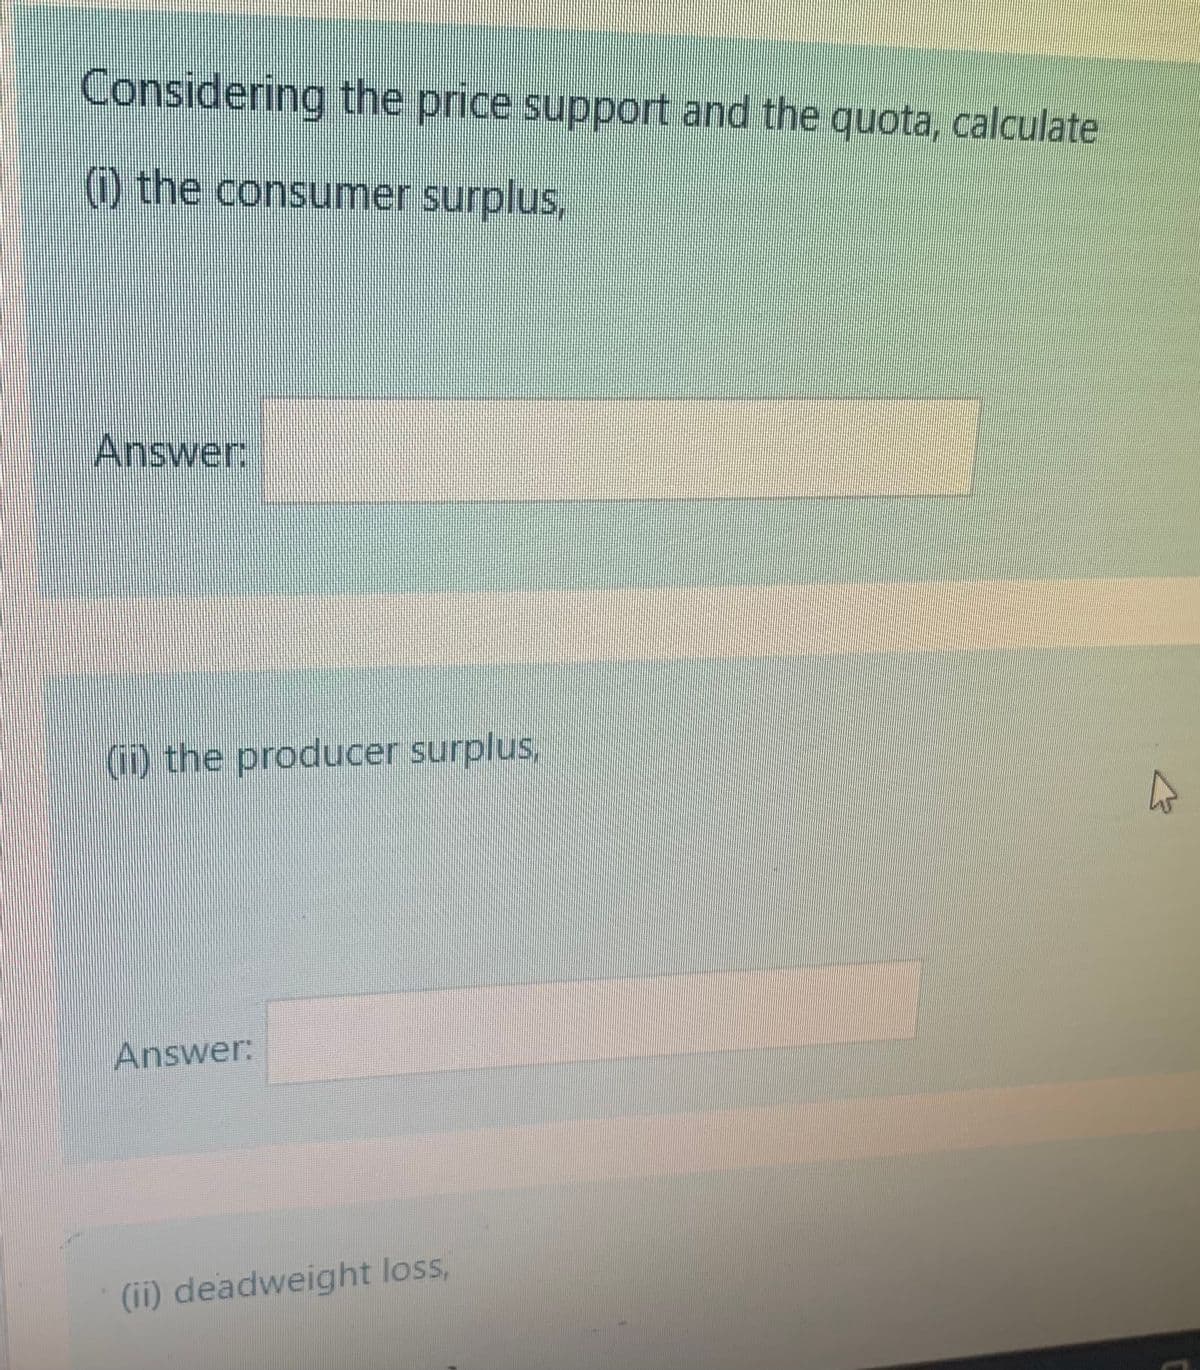 Considering the price support and the quota, calculate
) the consumer surplus,
Answer:
(i) the producer surplus
Answer:
(ii) deadweight loss,
